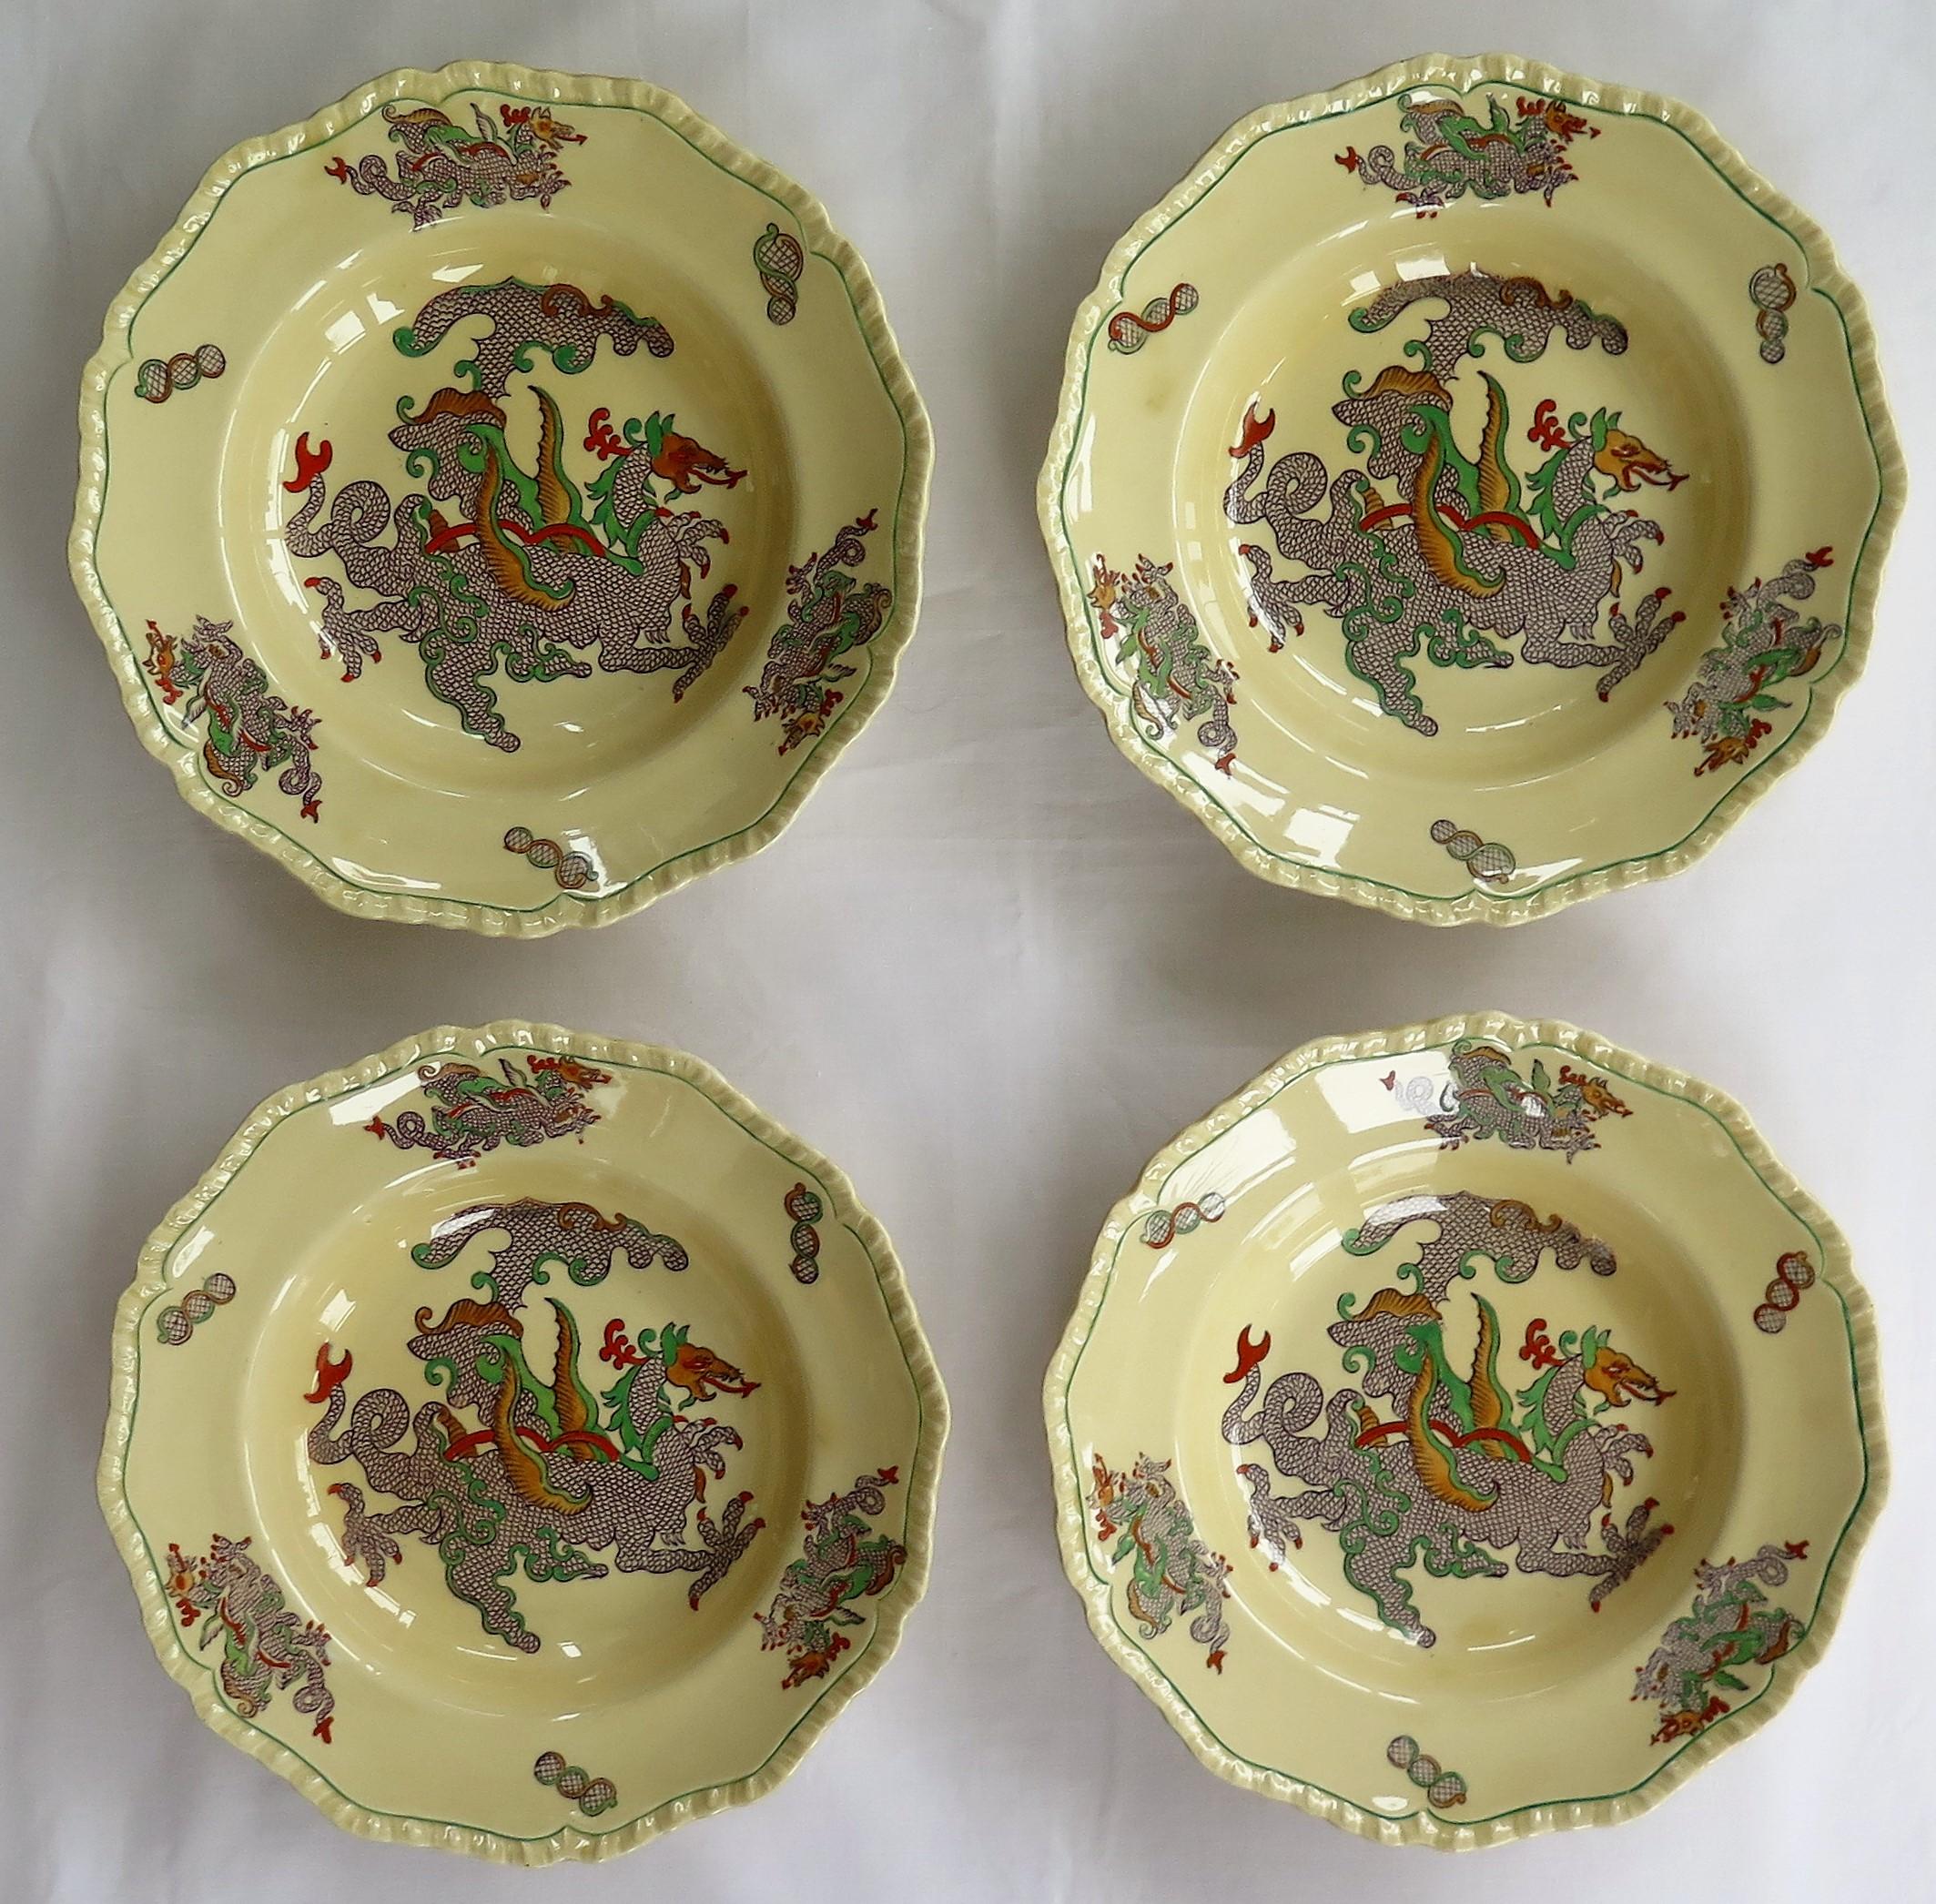 This is a lovely set of four large bowls or deep plates by Mason's Ironstone, England in the Chinese Dragon pattern, dating to the late 19th century, circa 1900.

The plates or bowls are circular in shape with a wavy molded edge.

The bowls are